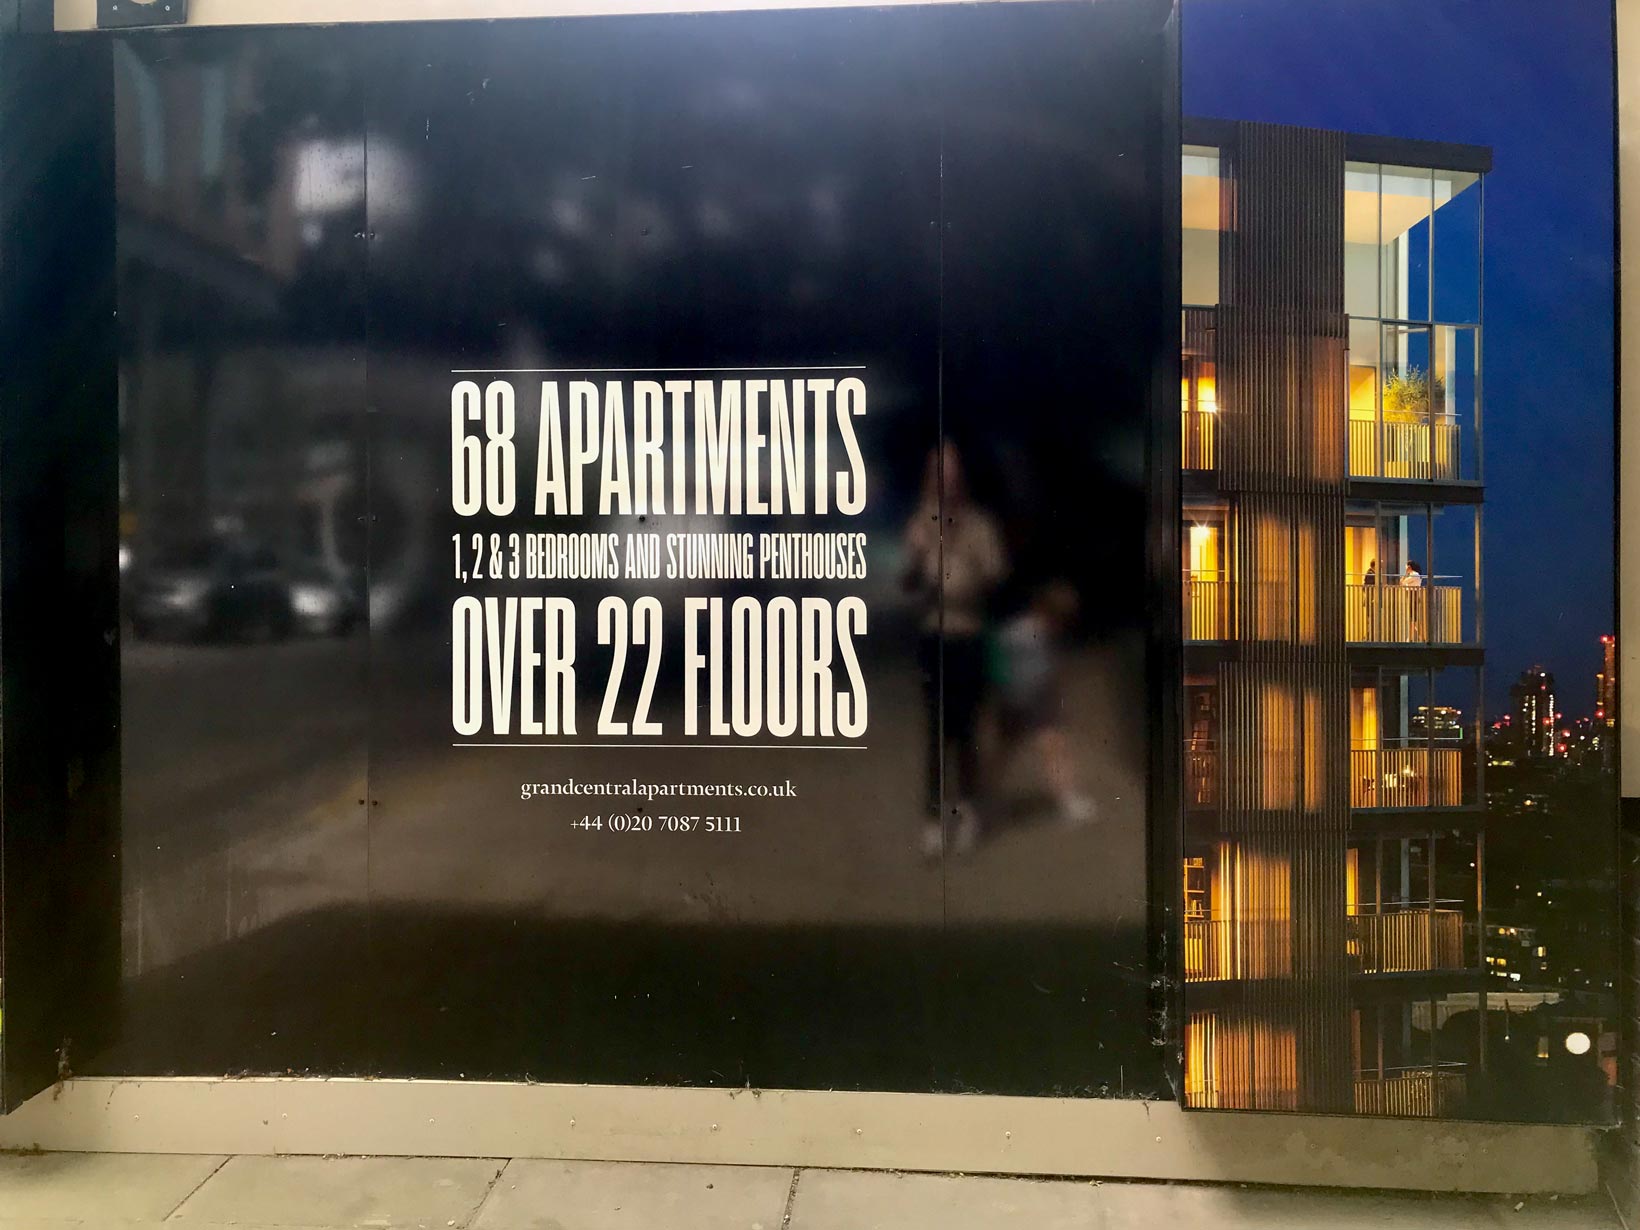 Grand Central Apartments hoarding